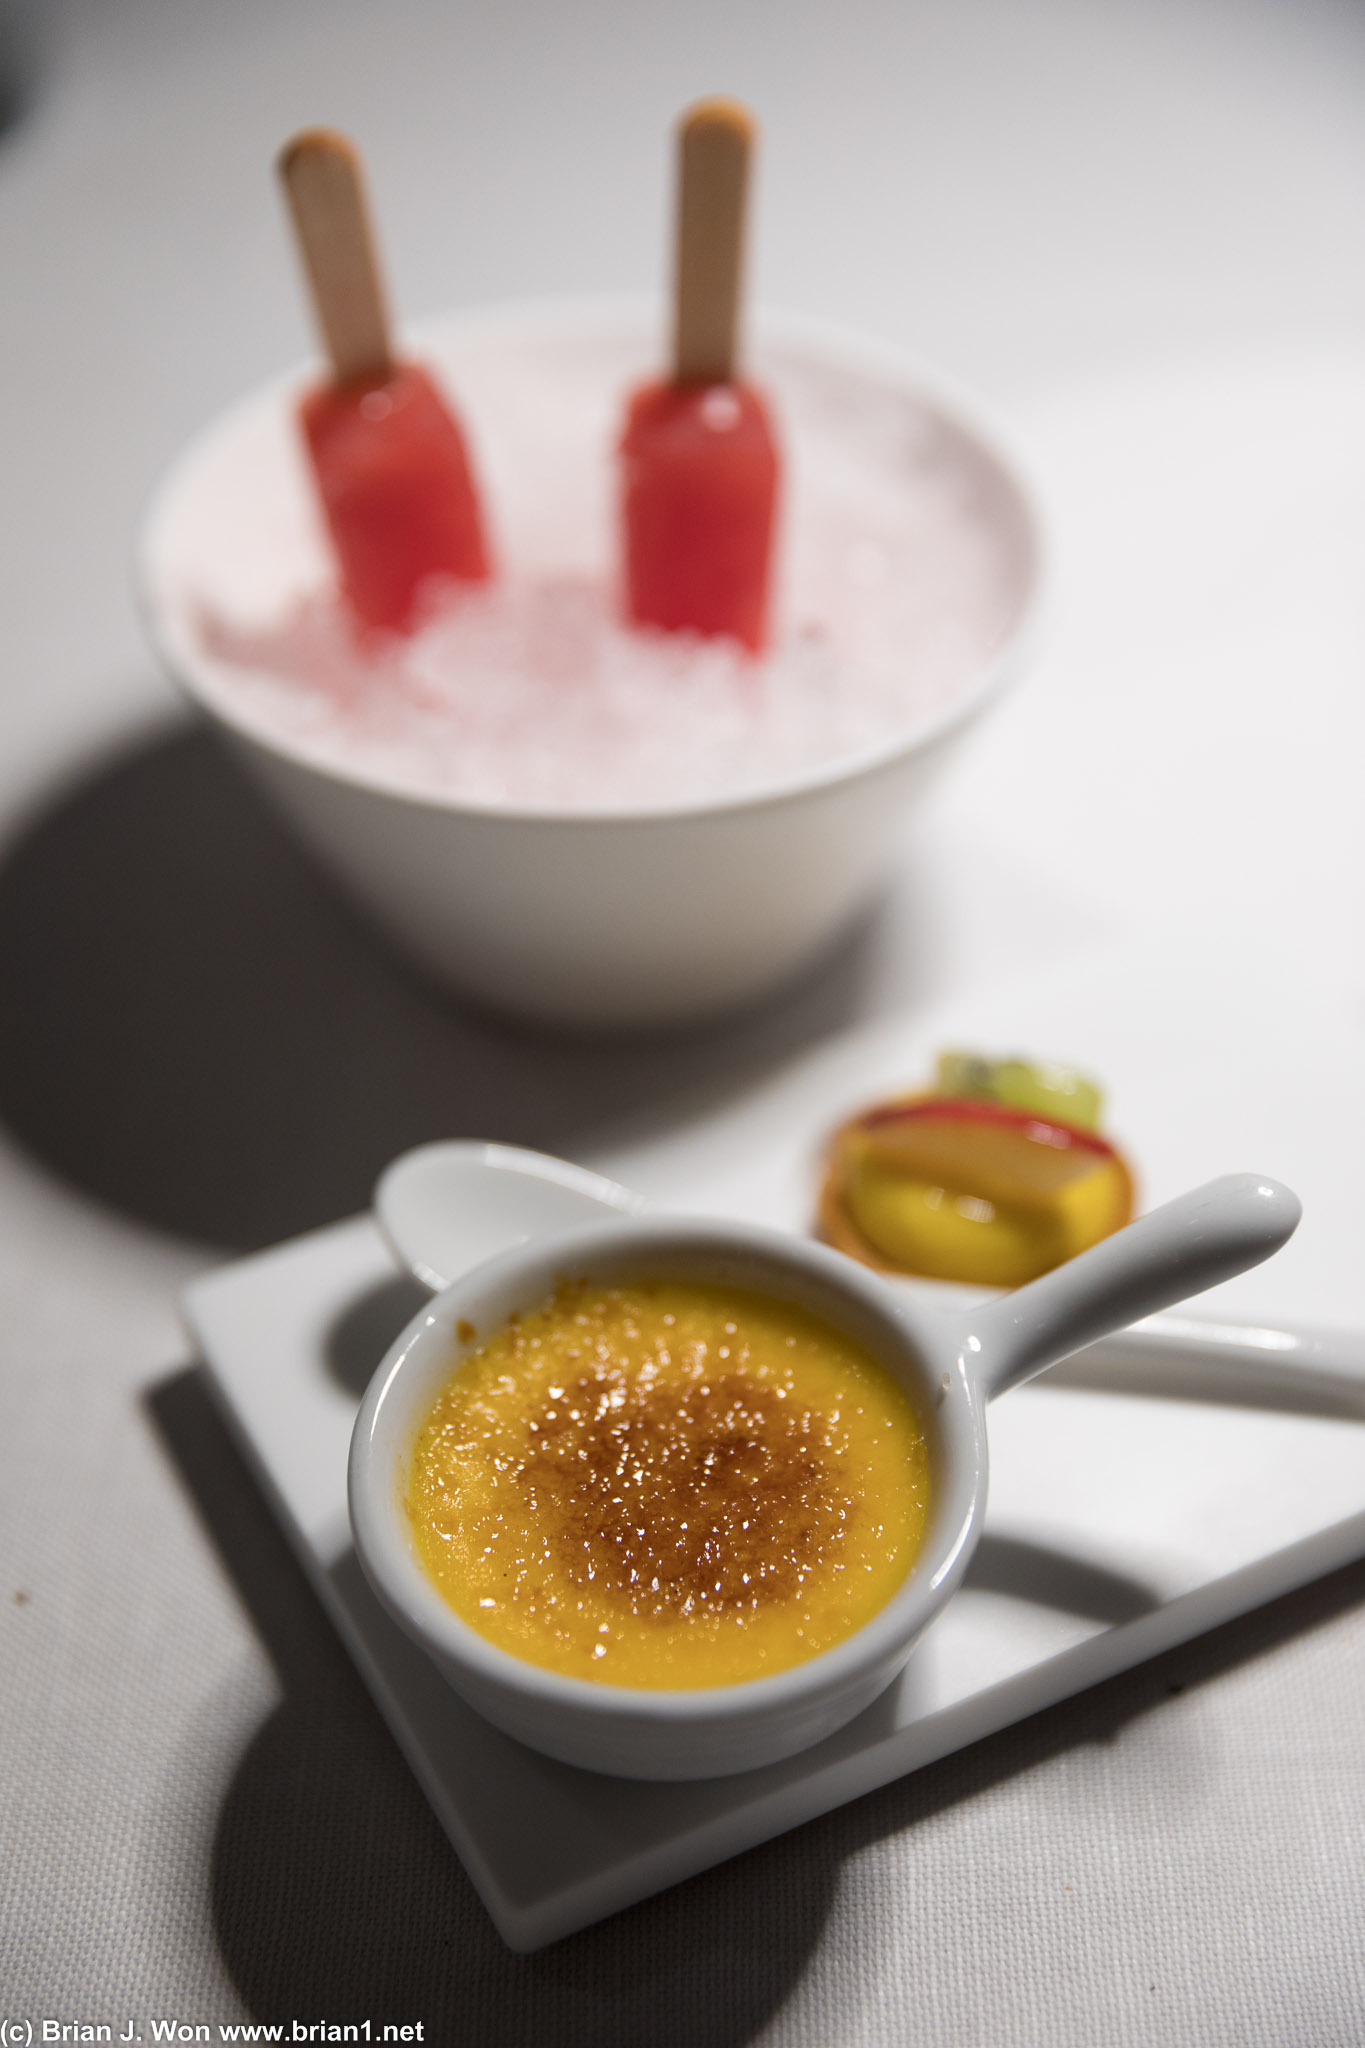 Crème brulee, cream with fruit, also watermelon and mint ice. A missed opportunity to shine.